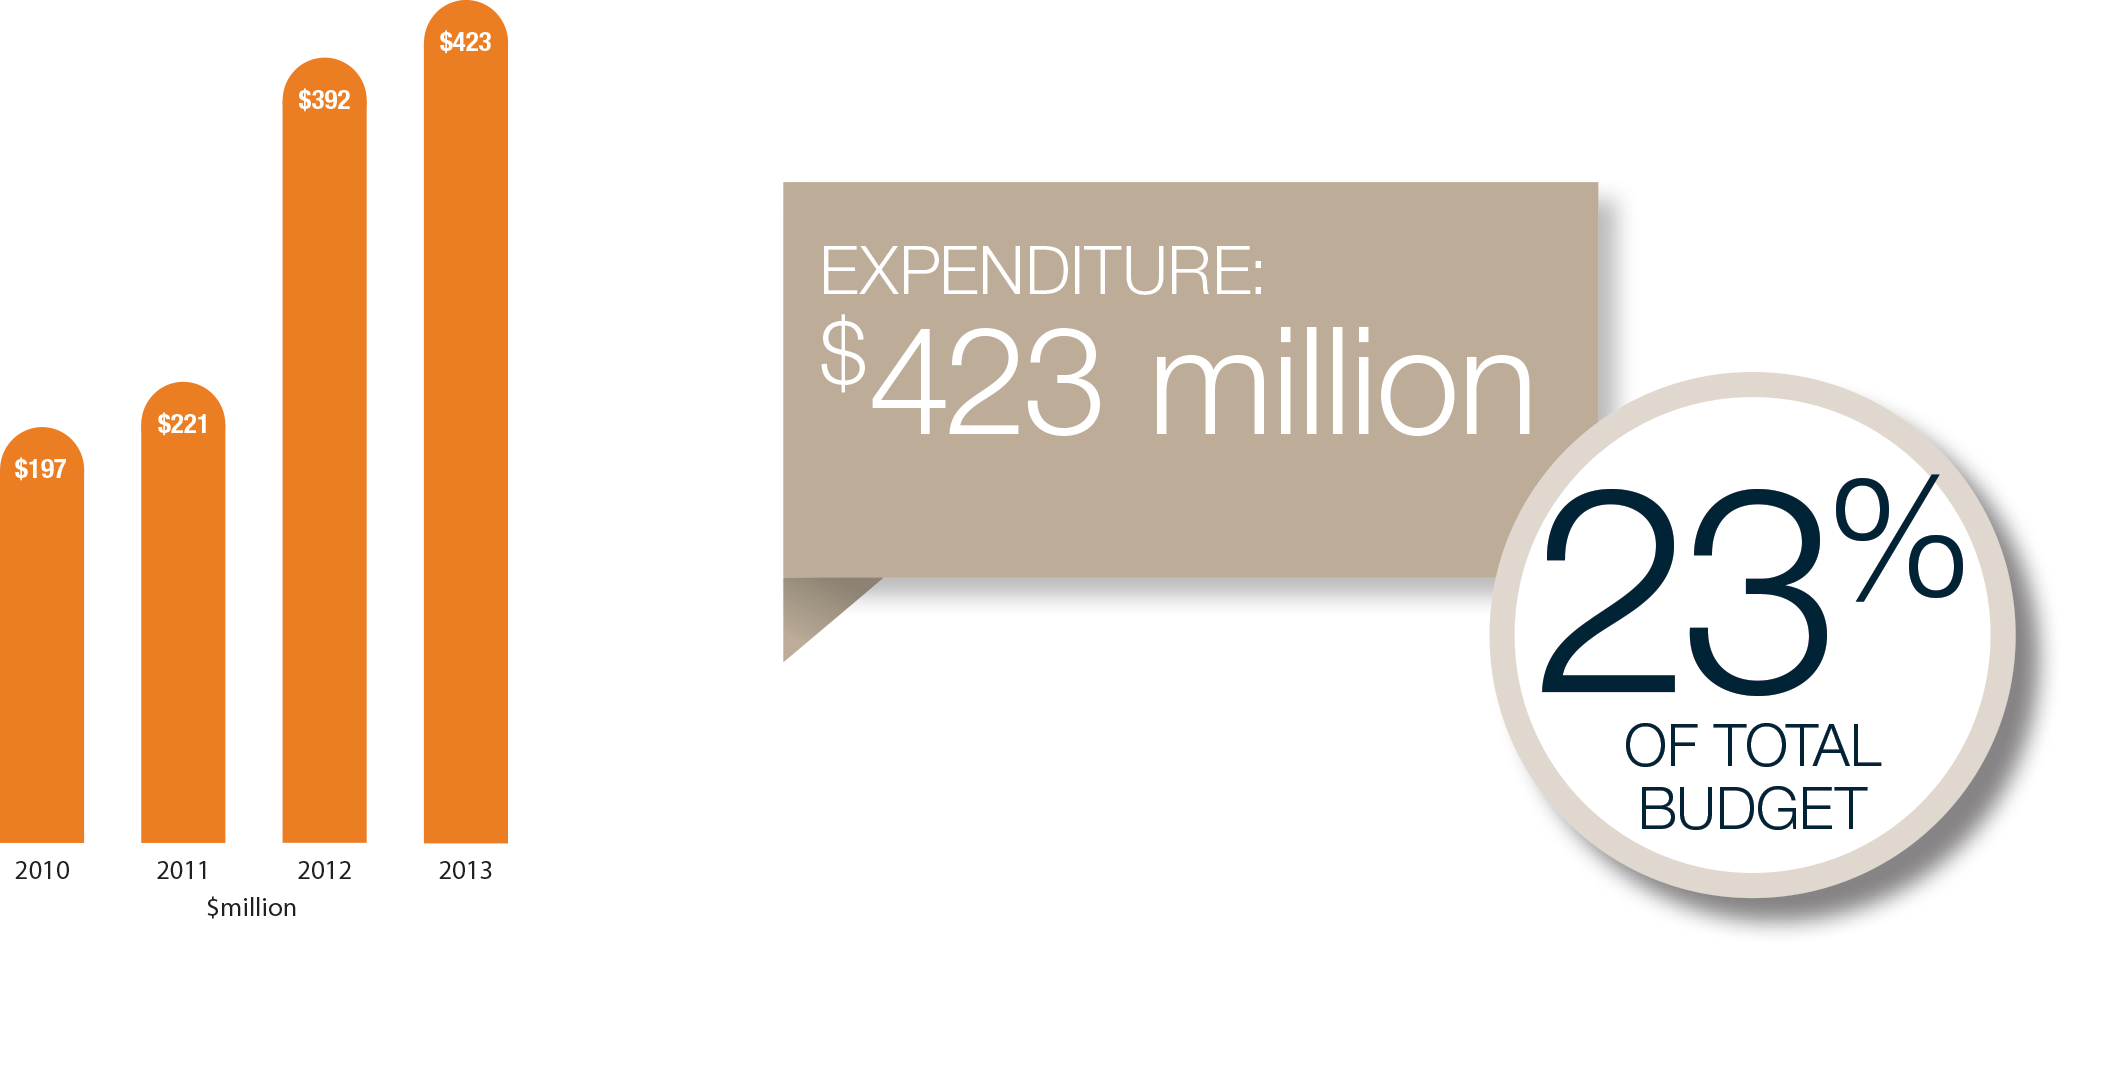 Expenditure in 2013 was $423 million or 23% of the total budget